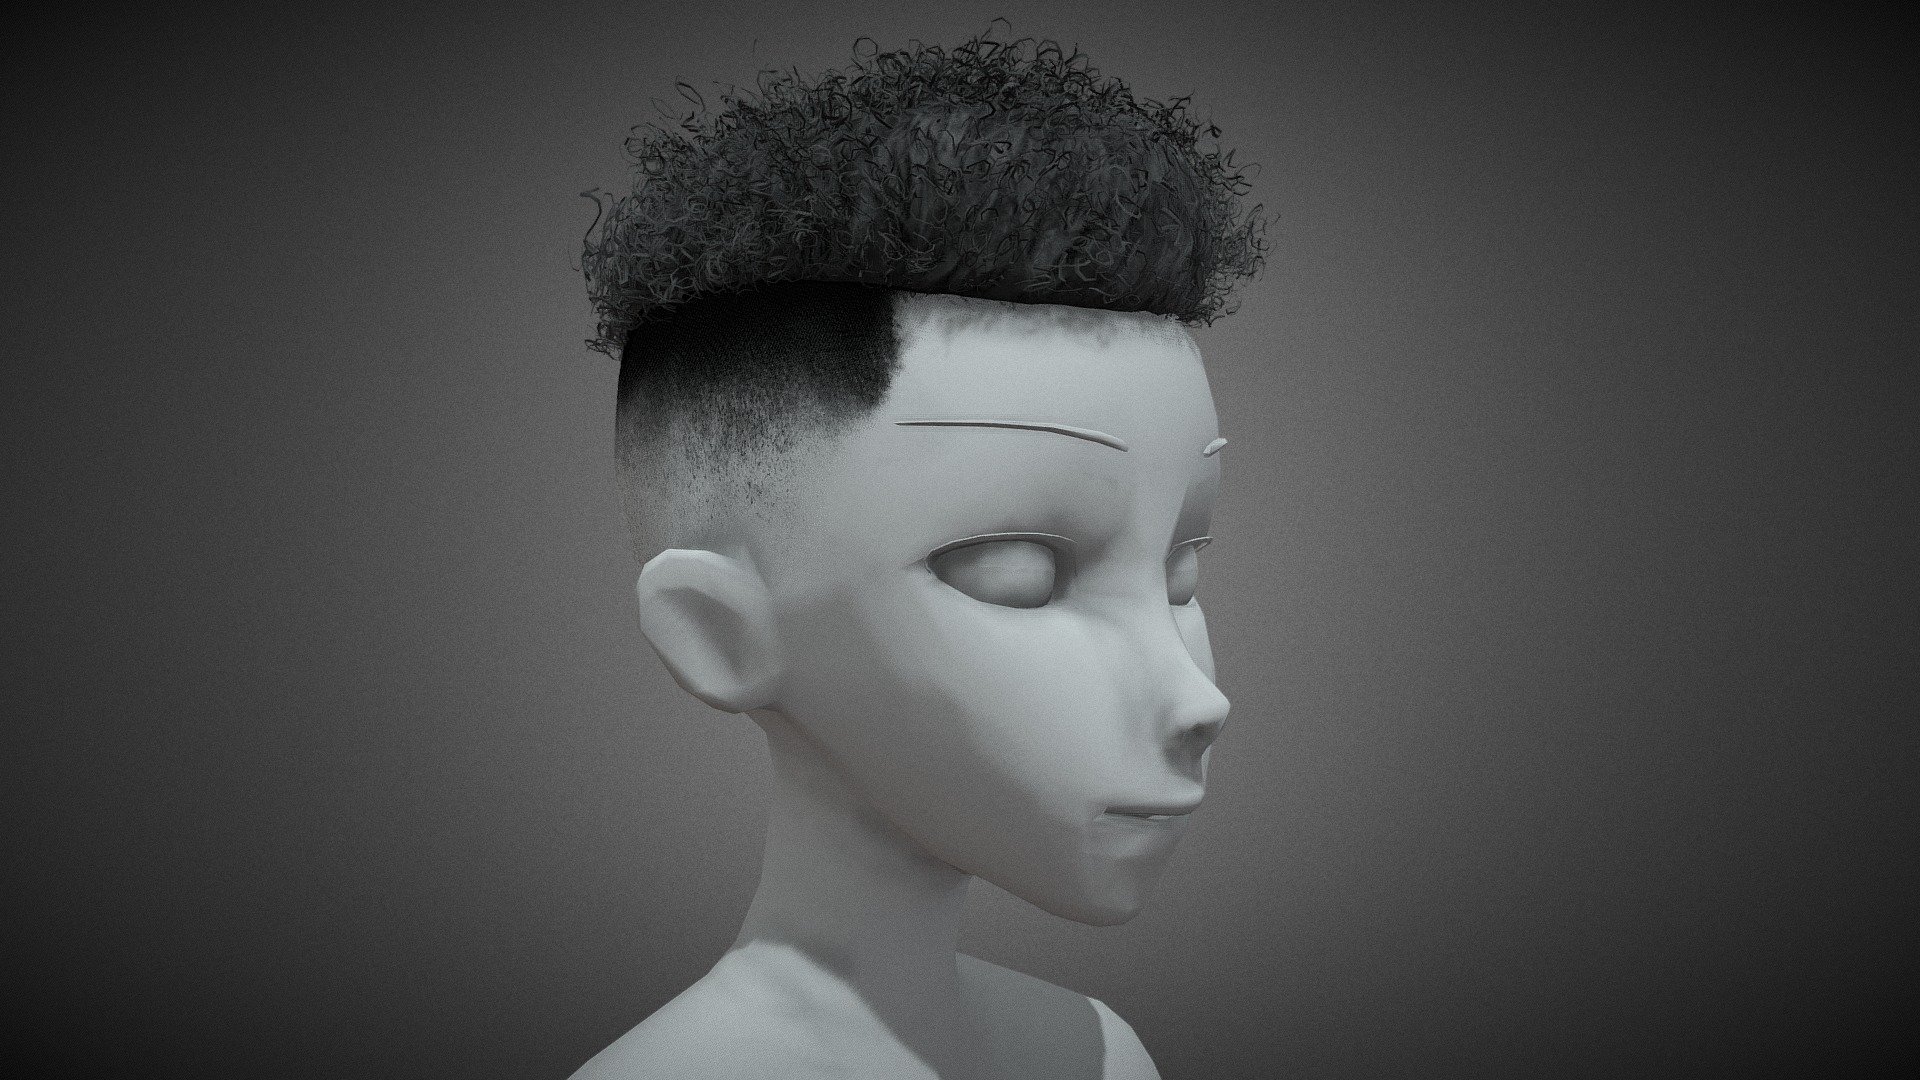 CG StudioX Present :
Male Hair Cards Style 12 - Curly Hair 2 lowpoly/PBR




The photo been rendered using Marmoset Toolbag 4 (real time game engine )

The head model is decimated to show how the hair looks on the head.


Features :



Comes with Specular and Metalness PBR 4K texture .

Good topology.

Low polygon geometry.

The Model is prefect for game for both Specular workflow as in Unity and Metalness as in Unreal engine .

The model also rendered using Marmoset Toolbag 4 with both Specular and Metalness PBR and also included in the product with the full texture.

The texture can be easily adjustable .


Texture :



One set of UV for the Hair [Albedo -Normal-Metalness -Roughness-Gloss-Specular-Ao-Hight] (4096*4096).

One set of UV for the Cap [Albedo -Normal-Metalness -Roughness-Gloss-Specular-Alpha] (4096*4096).


Files :
Marmoset Toolbag 4 ,Maya,,FBX,glTF,Blender,OBj with all the textures.




Contact me for if you have any questions.
 - Male Hair Cards Style 12 - Curly Hair 2 - Buy Royalty Free 3D model by CG StudioX (@CG_StudioX) 3d model